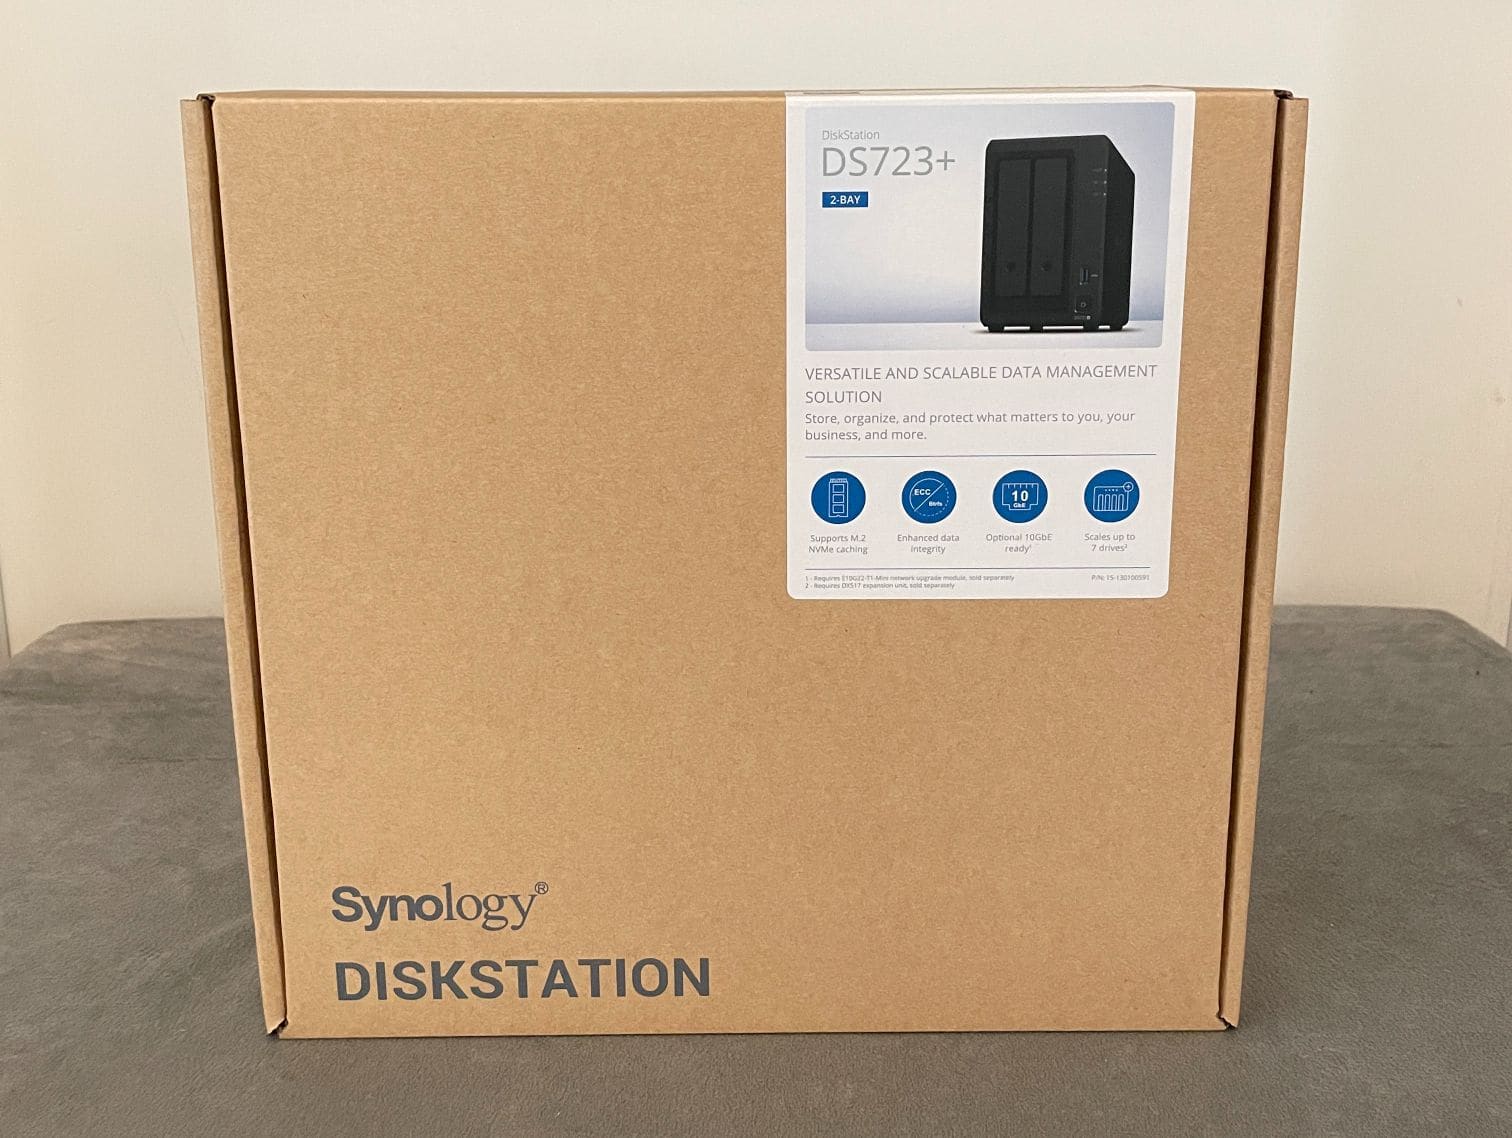 New and used Synology Network-Attached Storage for sale, Facebook  Marketplace